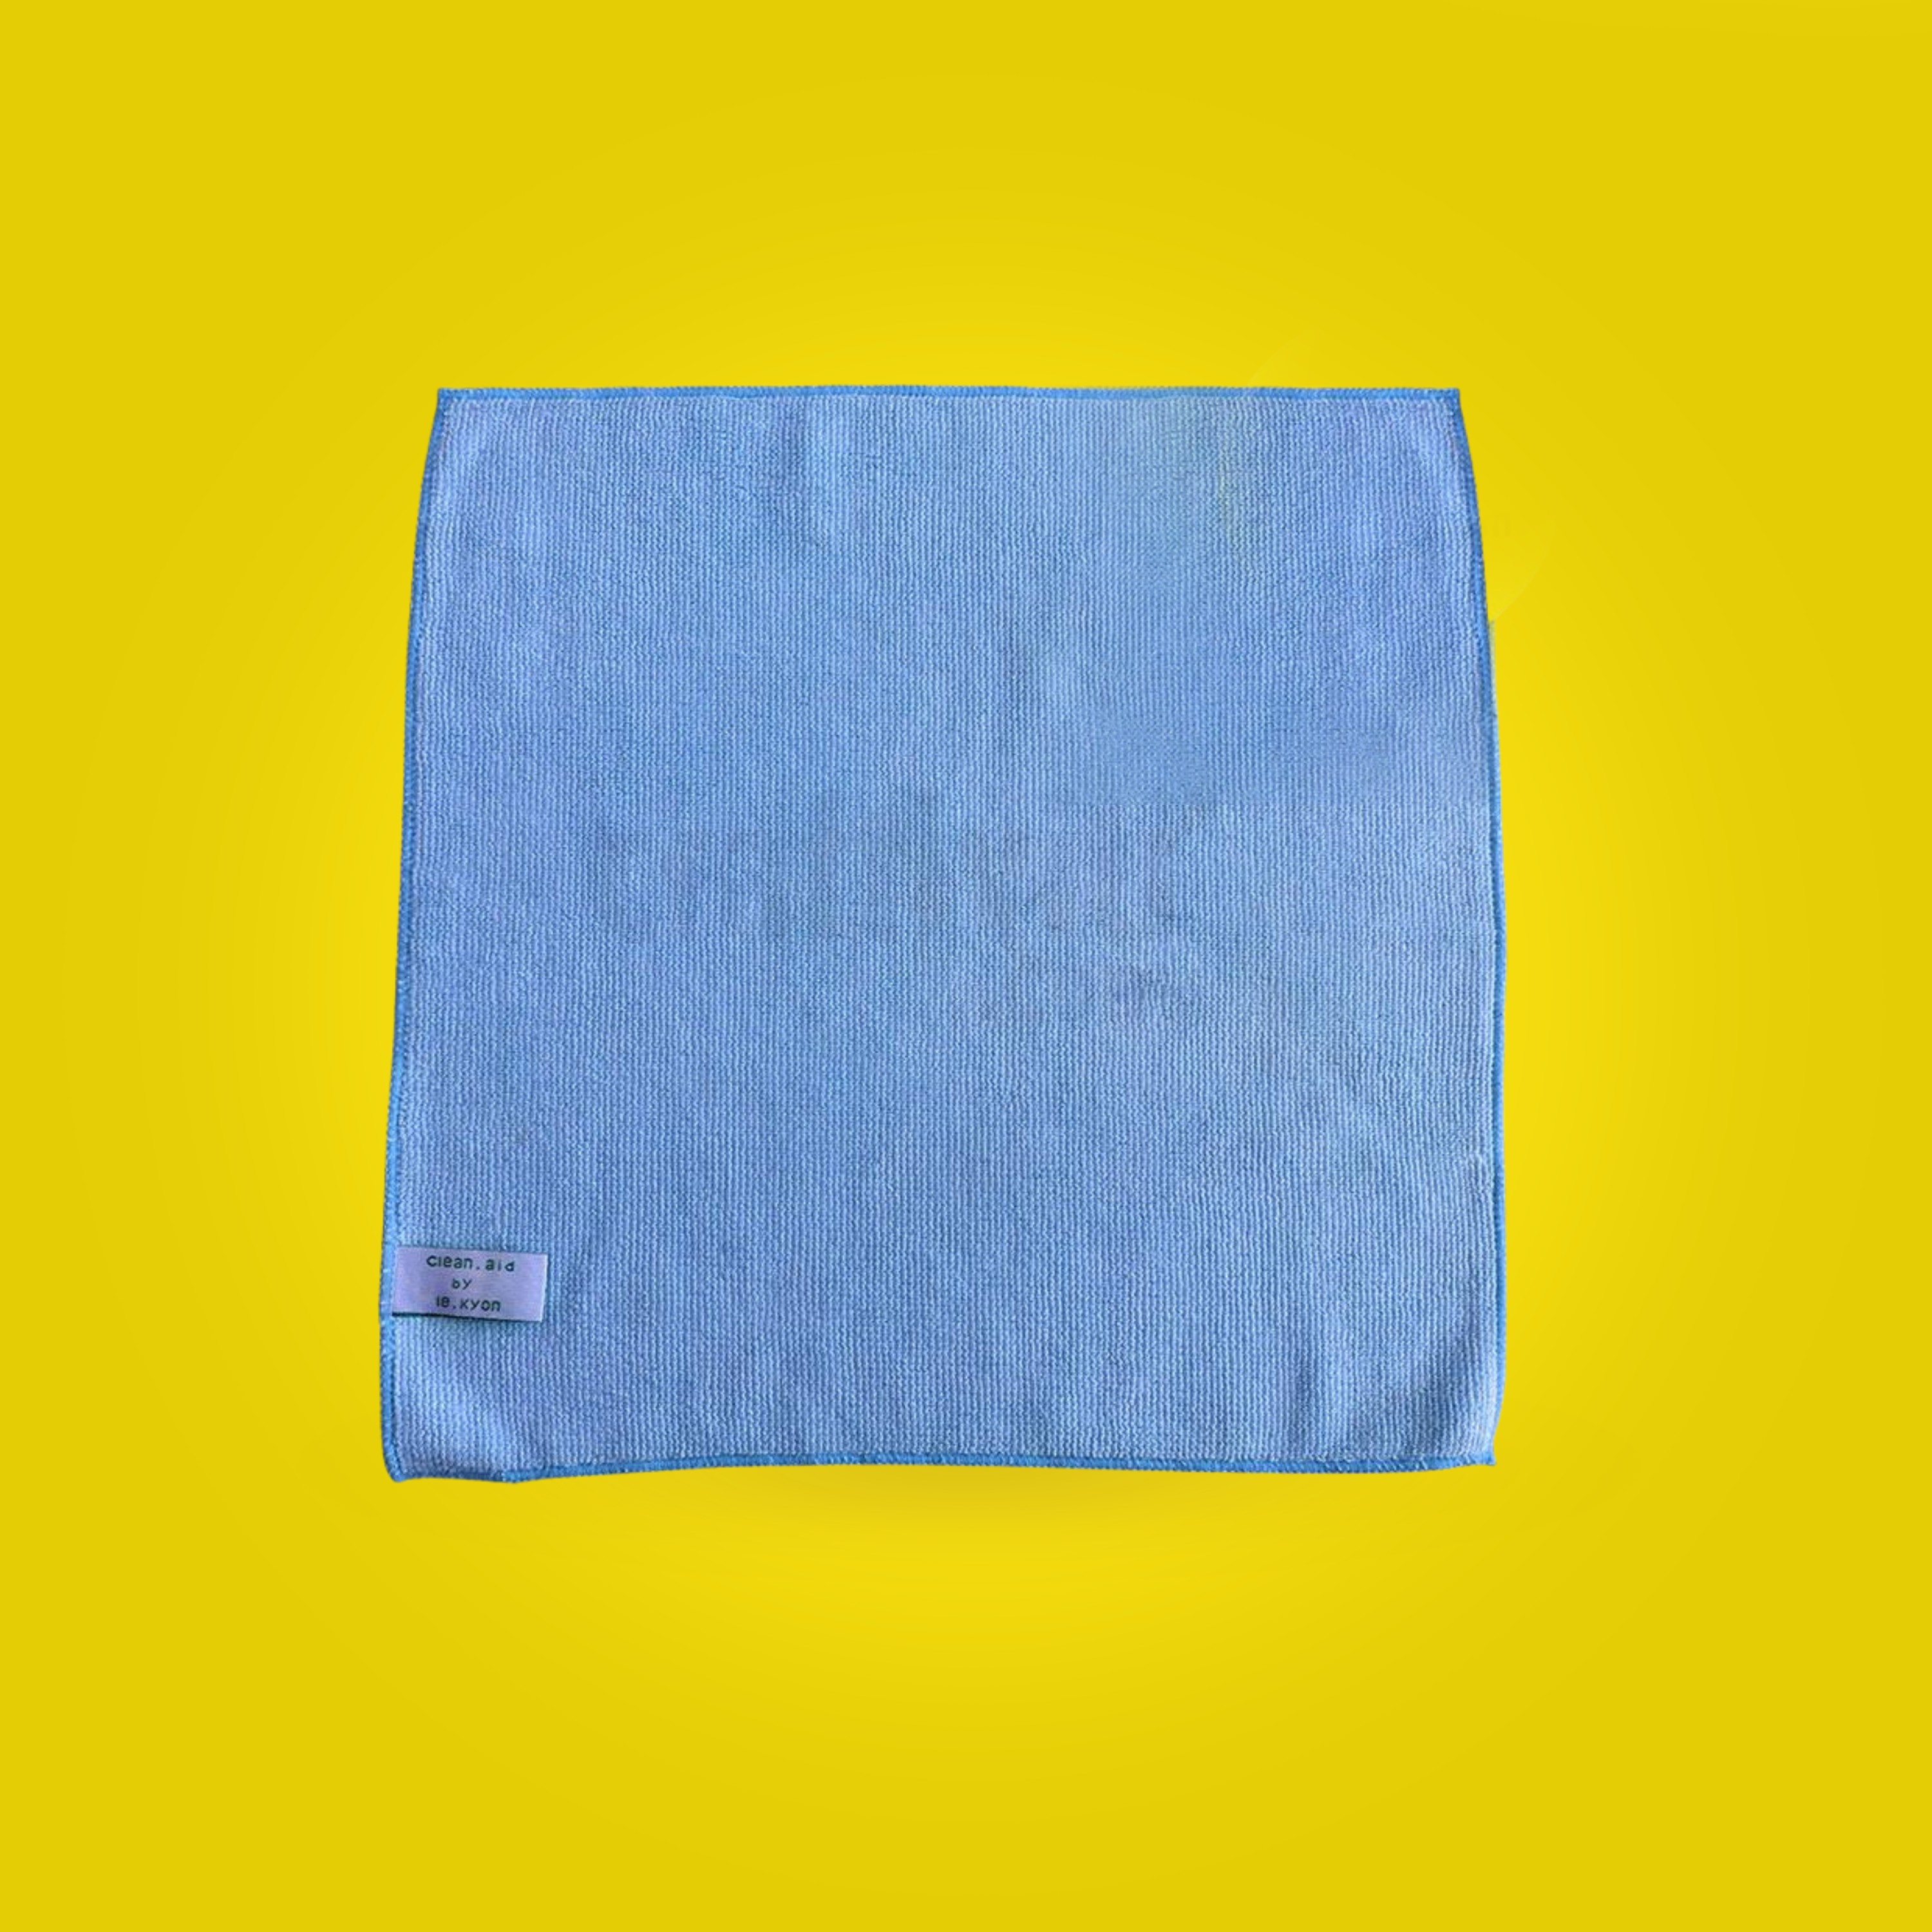 [MUST HAVE!] Clean Aid Microfibre Cleaning Cloth - Blue Multi-Purpose Cloth Tools - Craftiviti